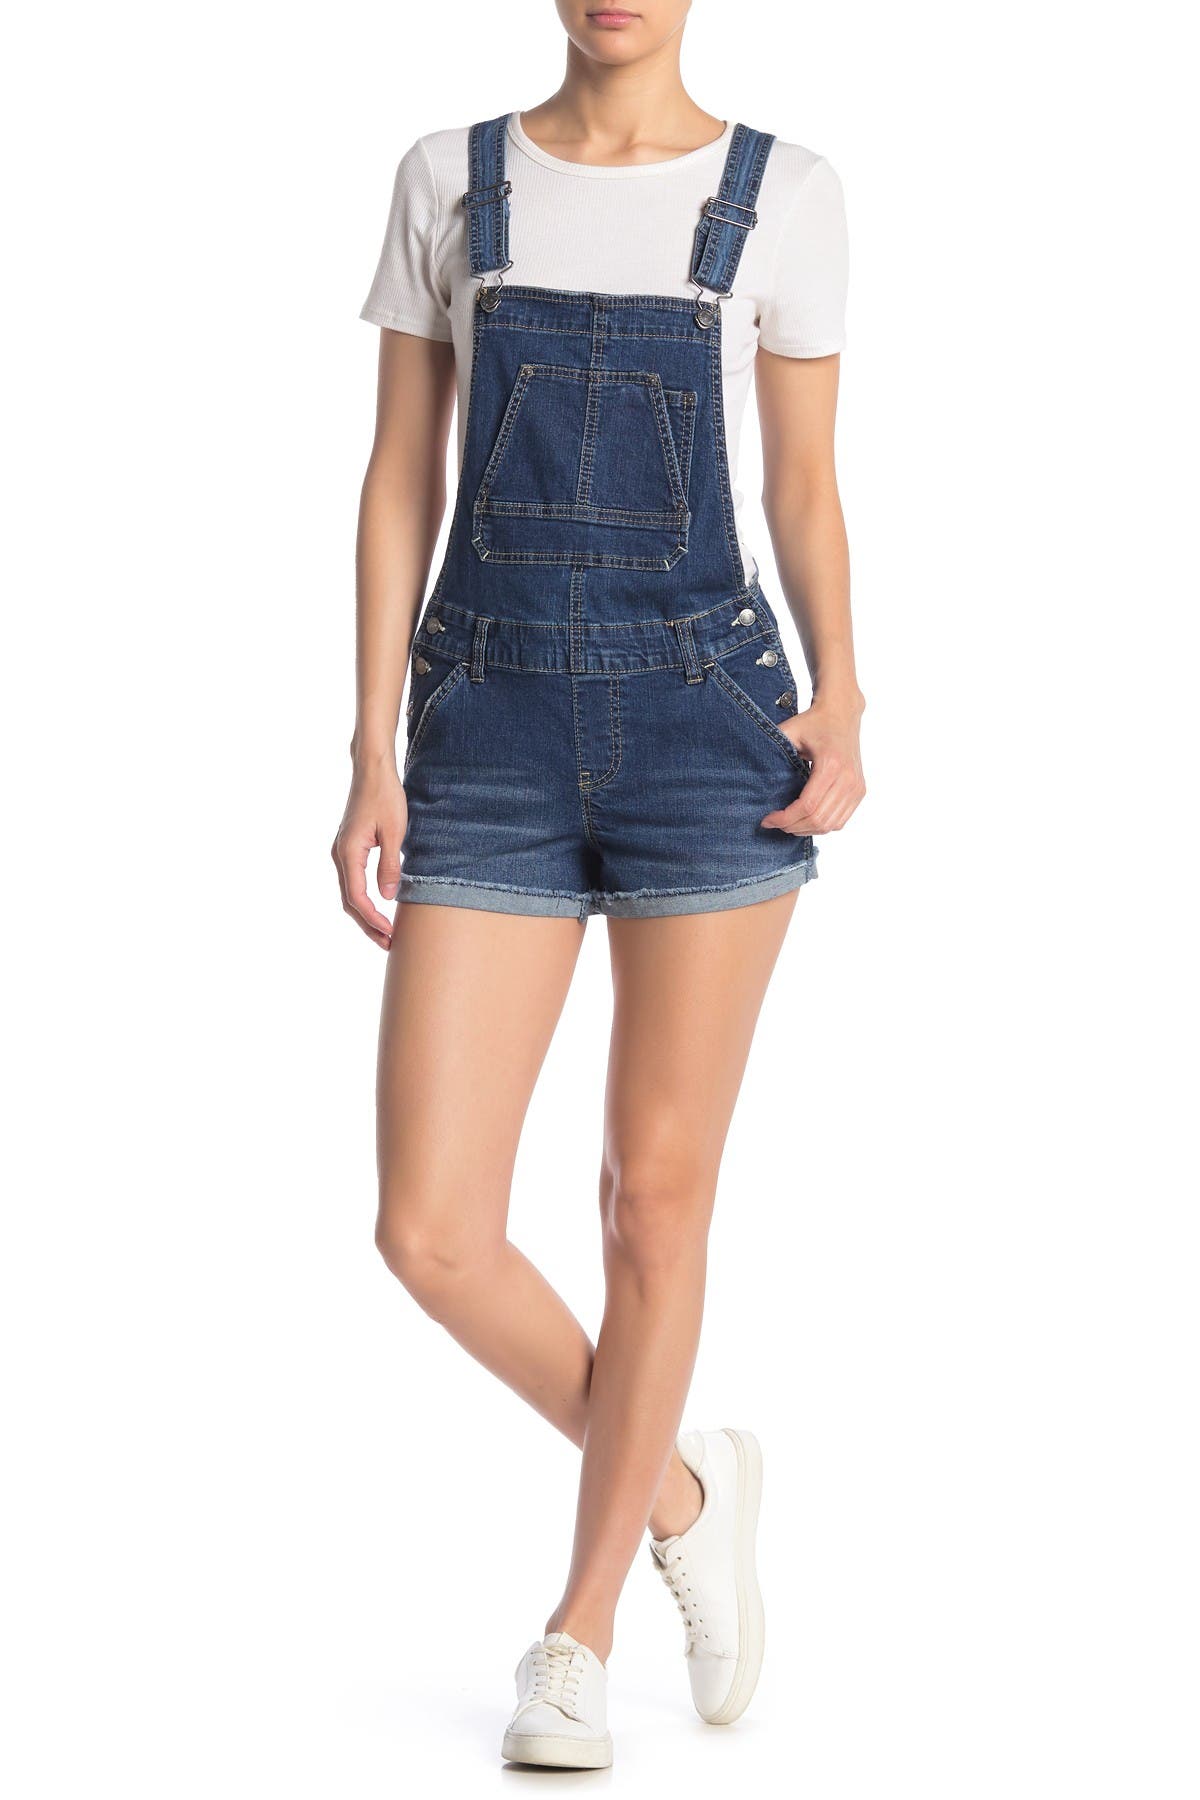 unionbay overall shorts